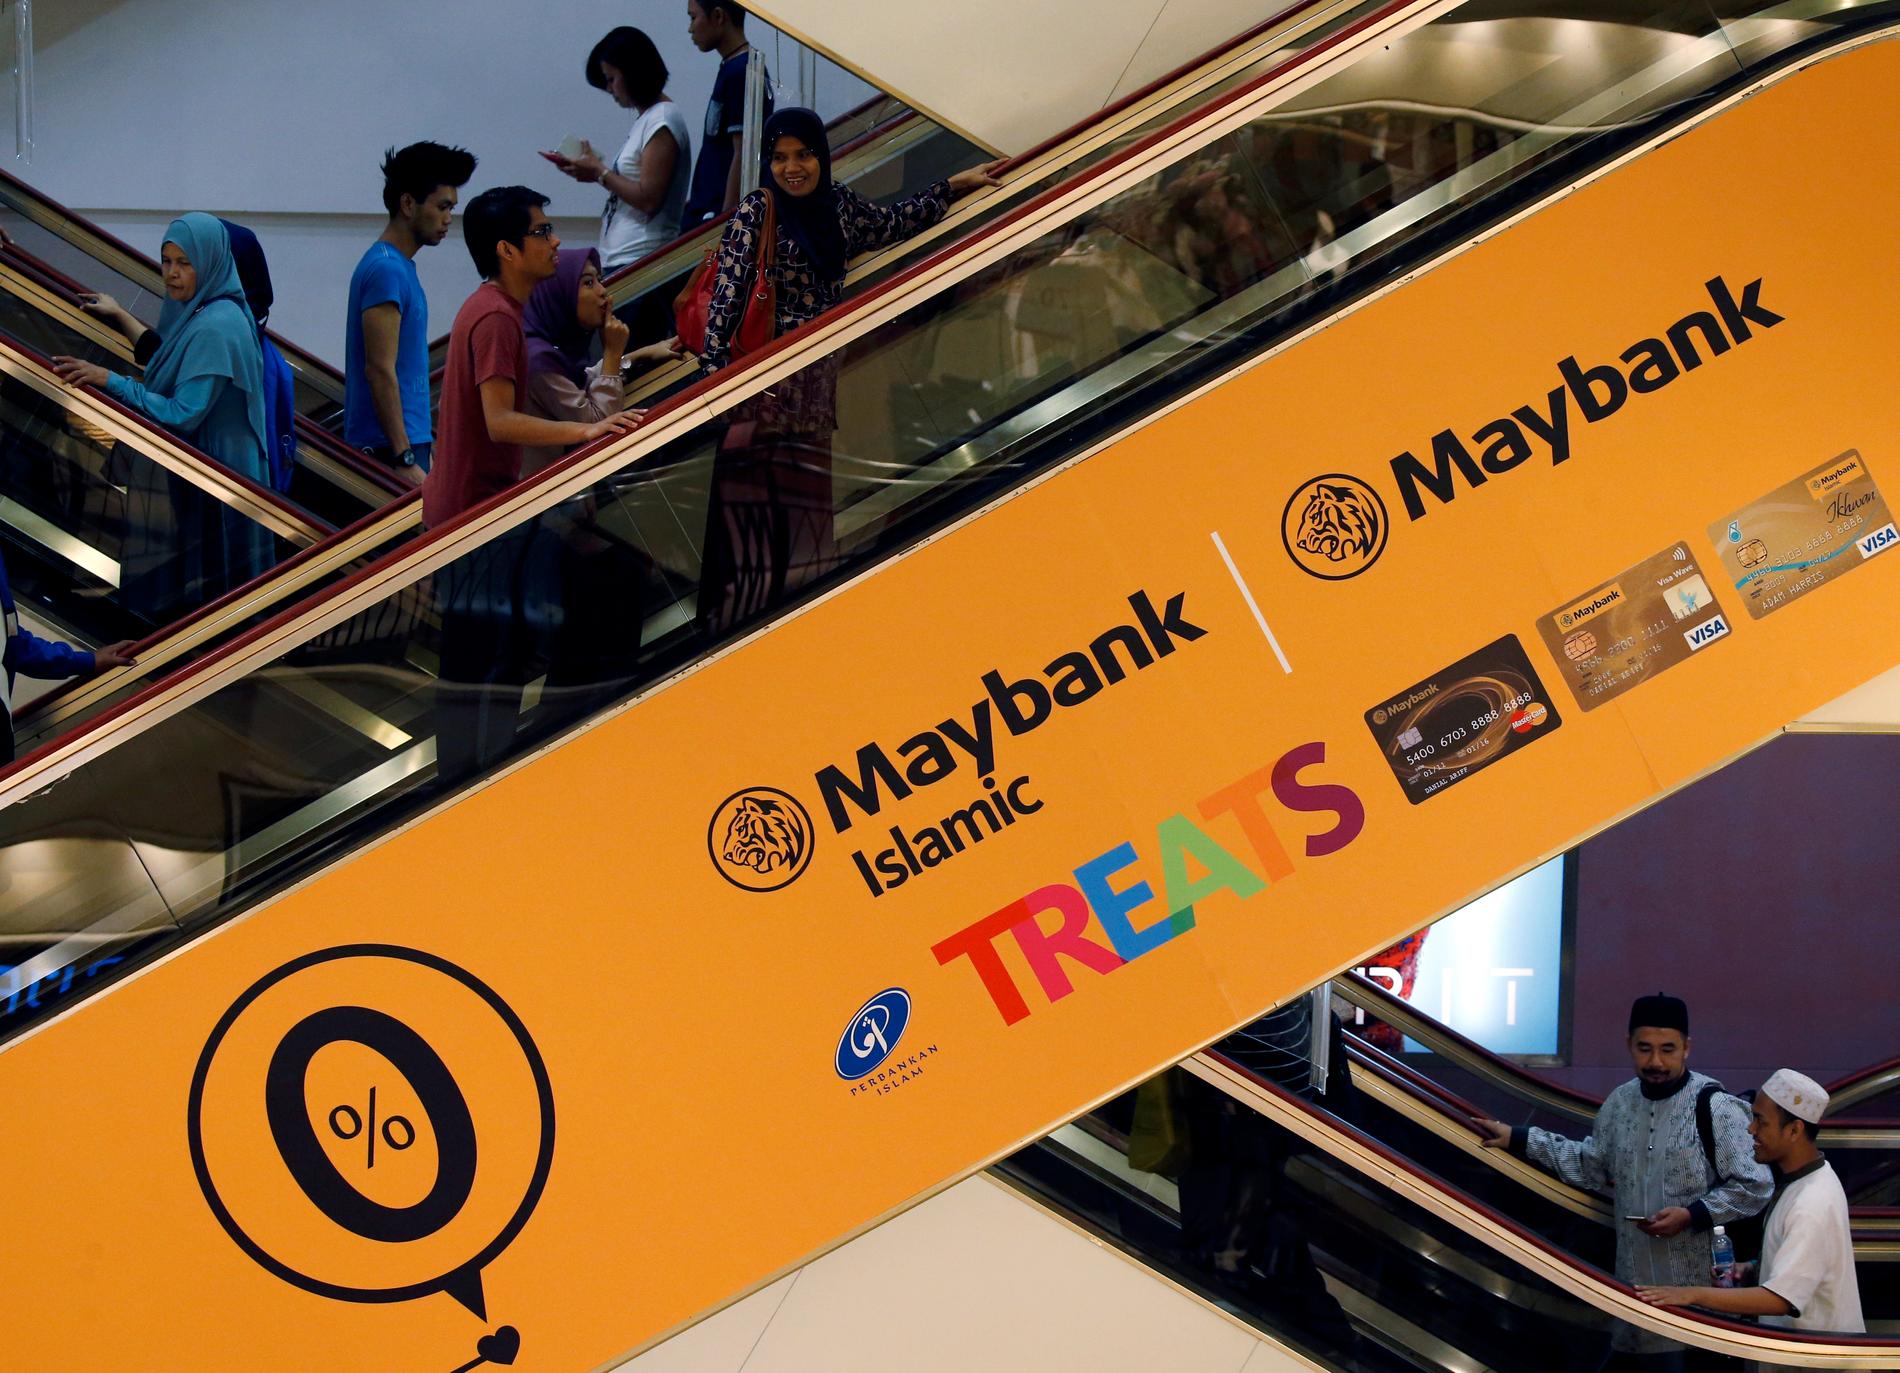 Malaysian Woman Discovers $86 Million in Bank Account Error: Maybank Mistake Goes Viral